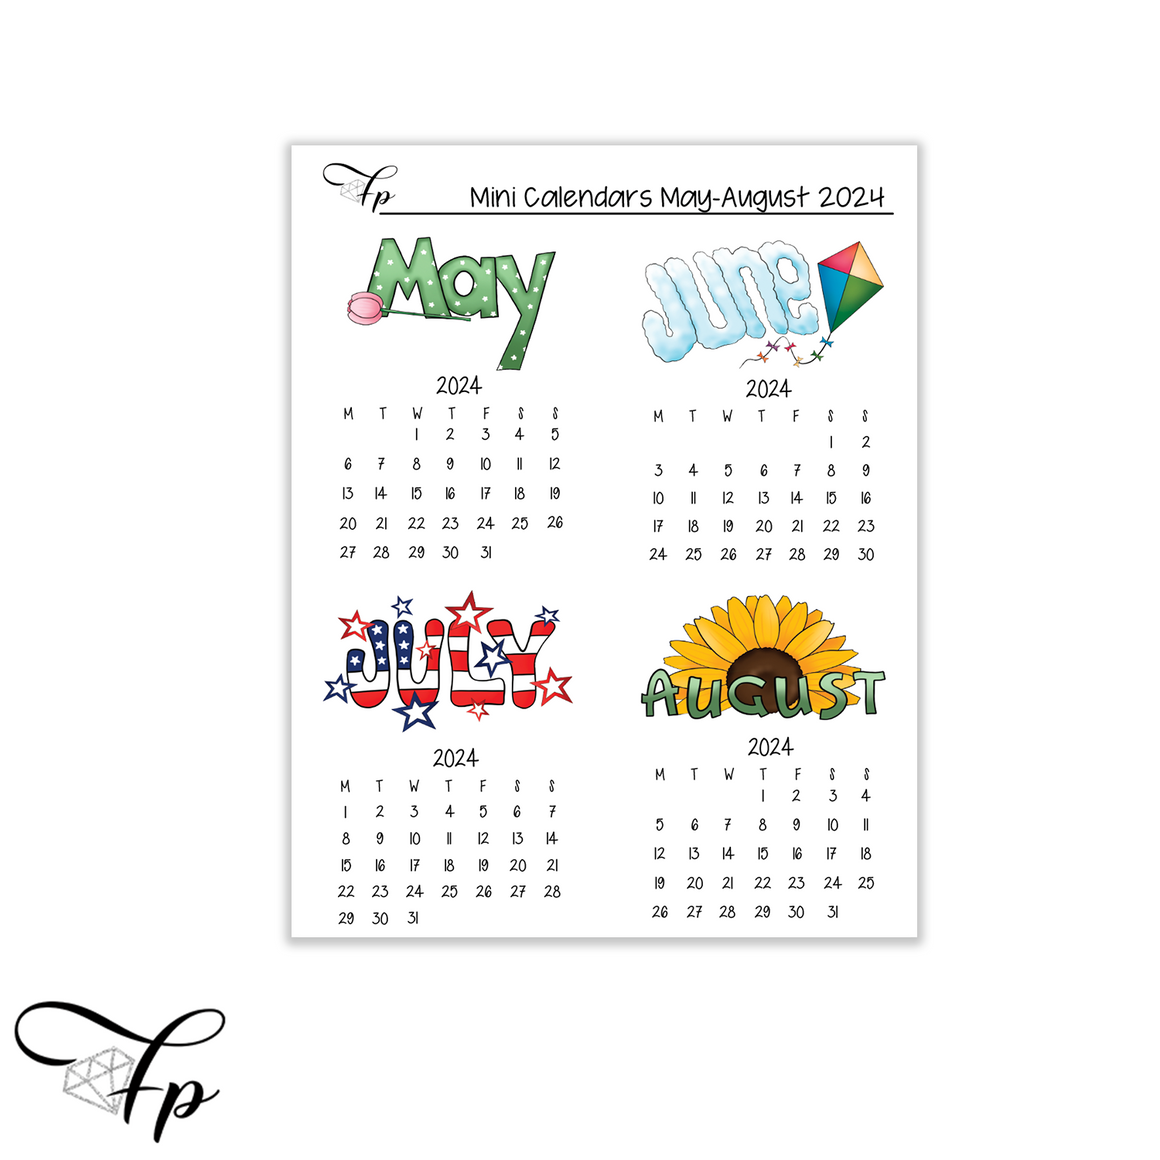 May-August 2024 Calendars